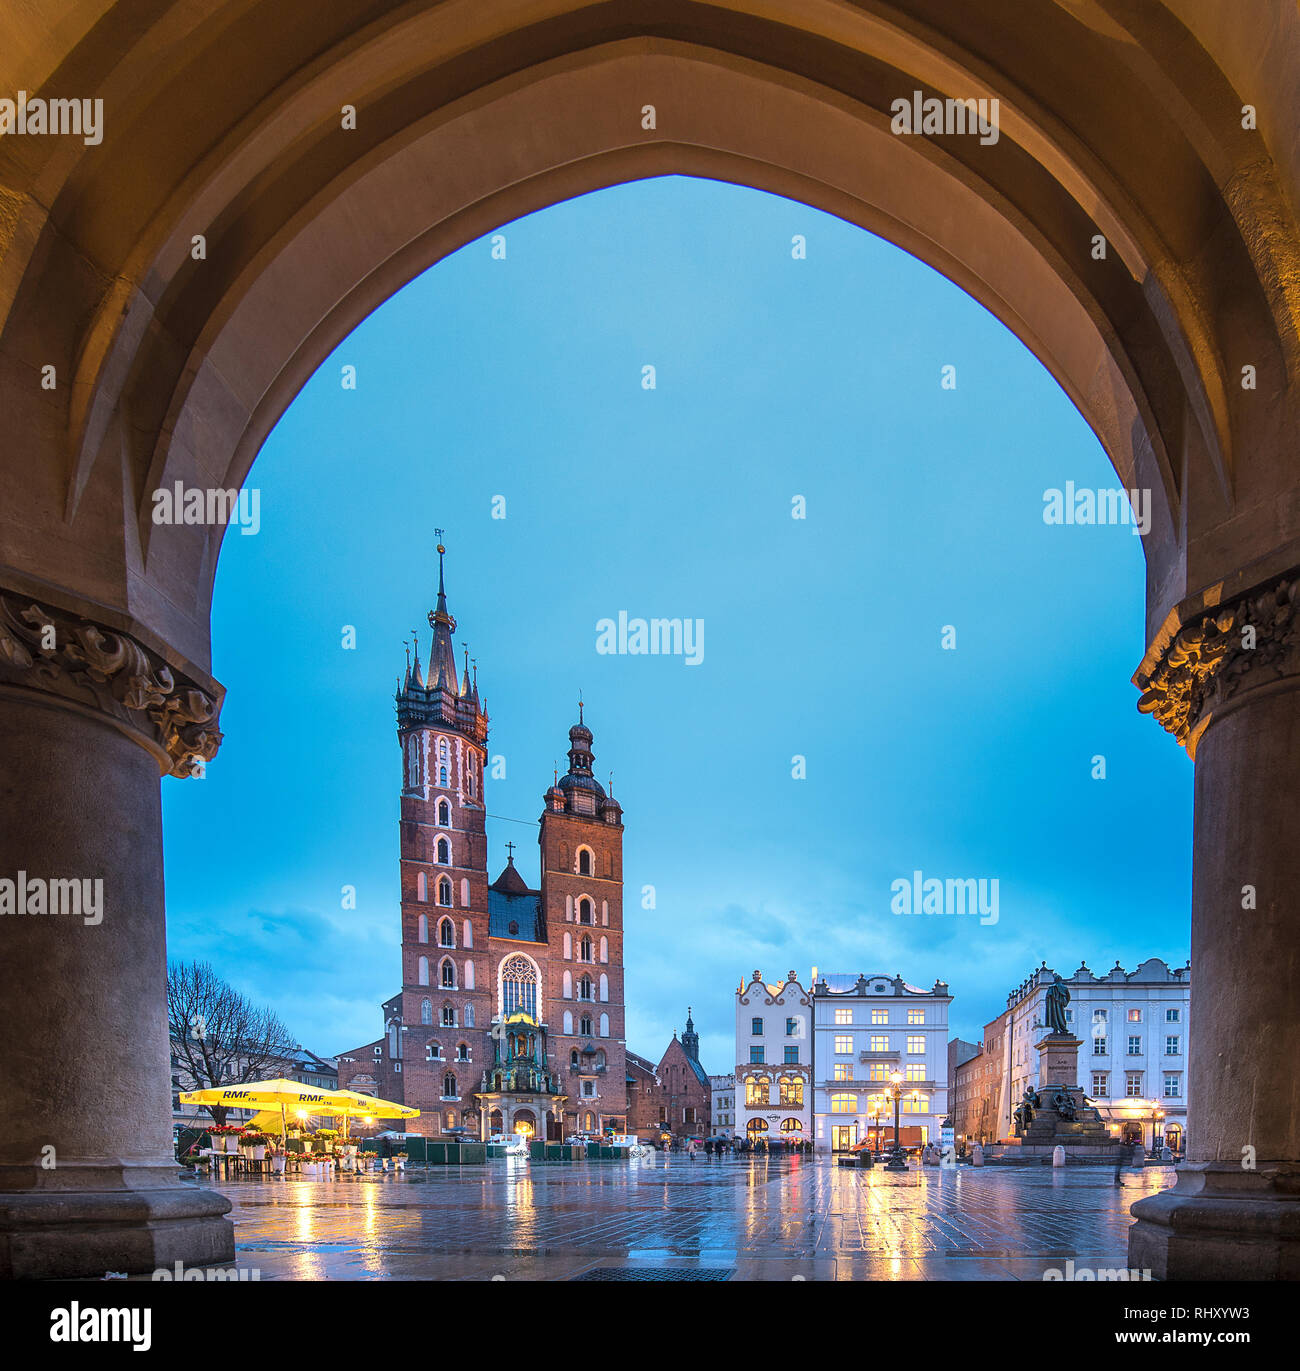 Mary's Basilica (Mariacki Church) and white carriages illuminated on The Main Market Square at night in the Old Town of Krakow (Cracow), Poland Stock Photo